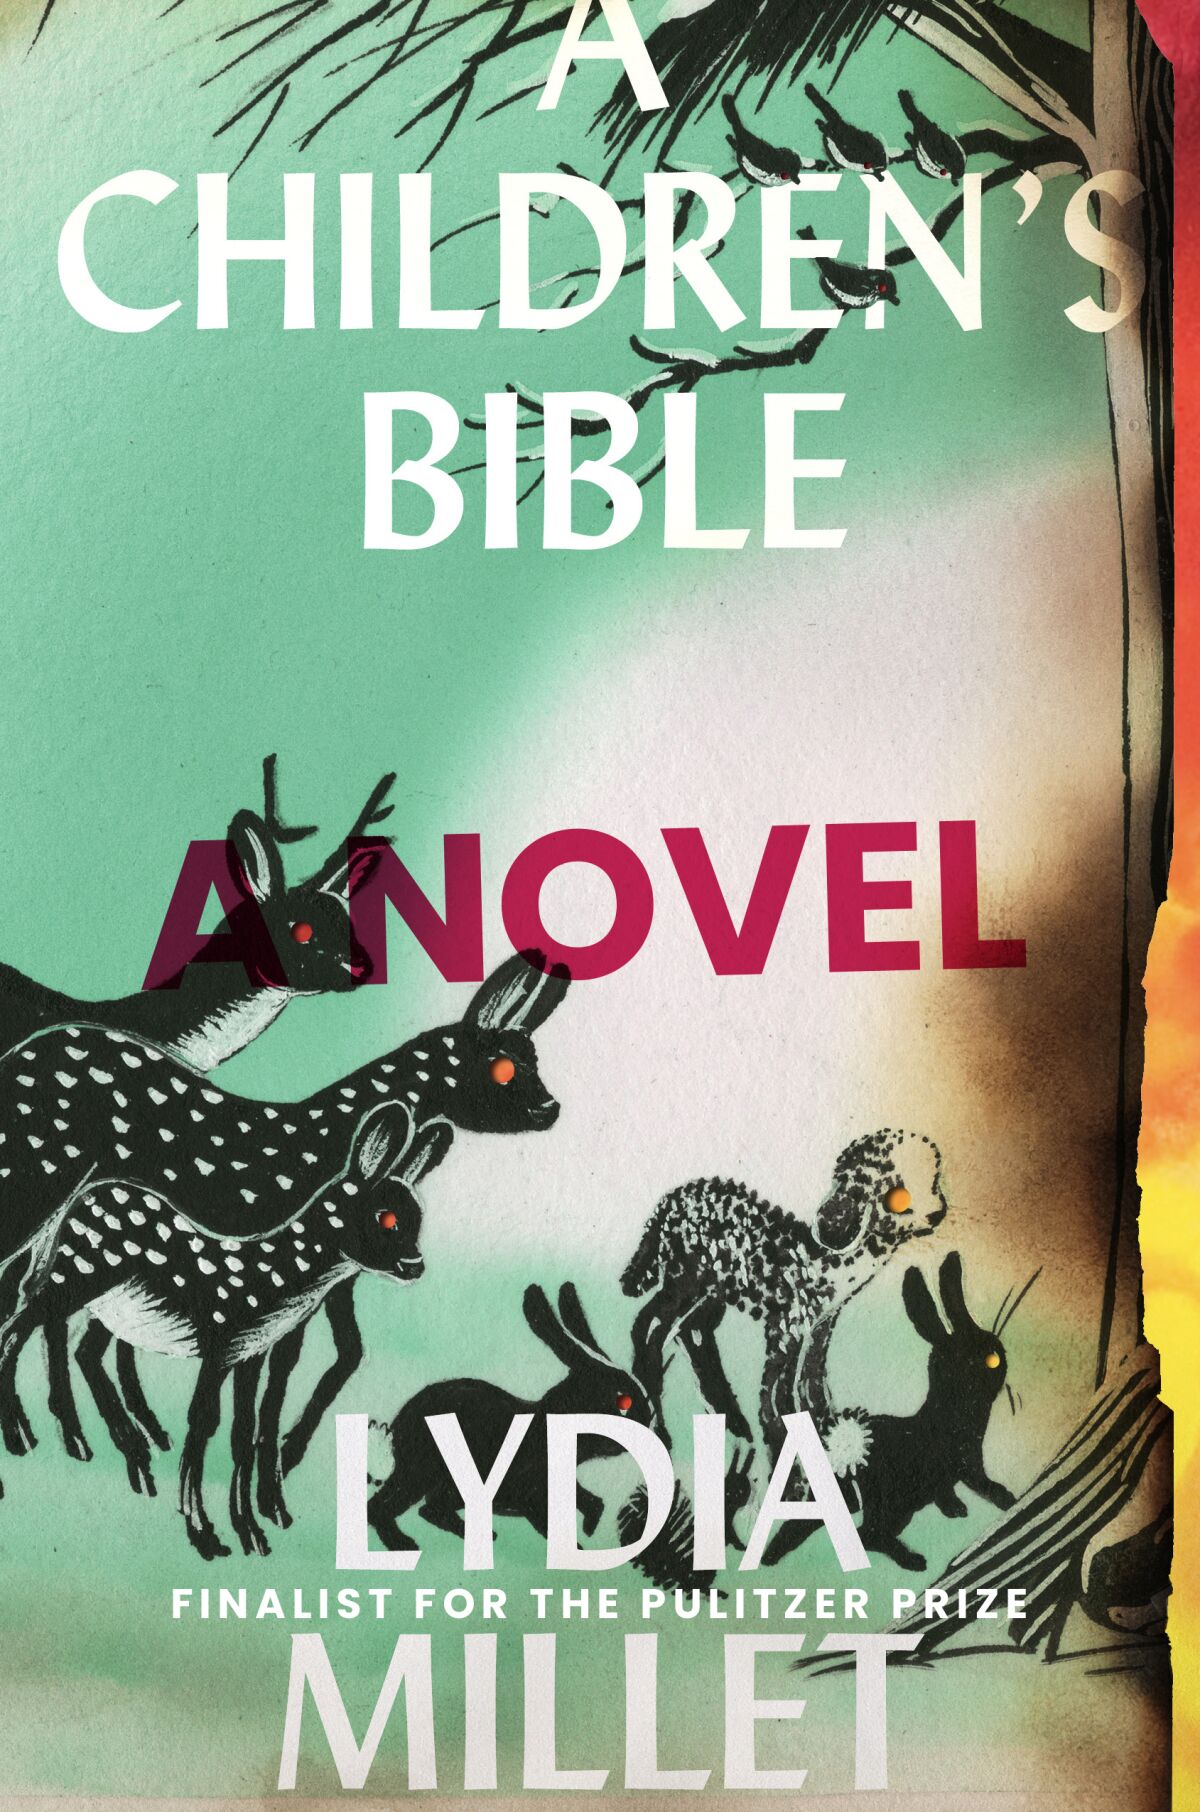 Cover jacket of the book "A Children's Bible"  by Lydia Miller.